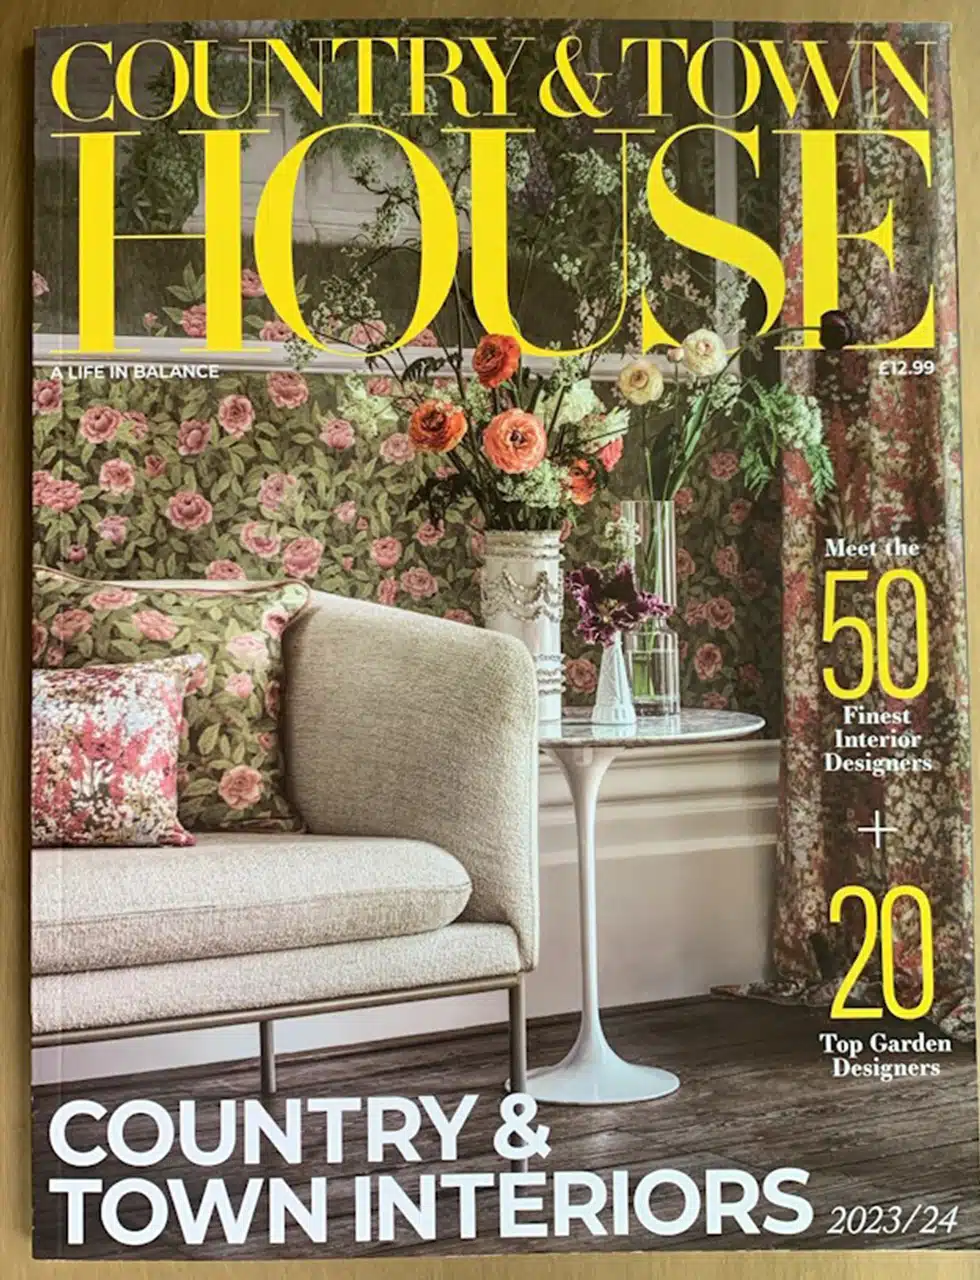 The cover of an edition of Country and Town House, one which features the top 50 interior designers